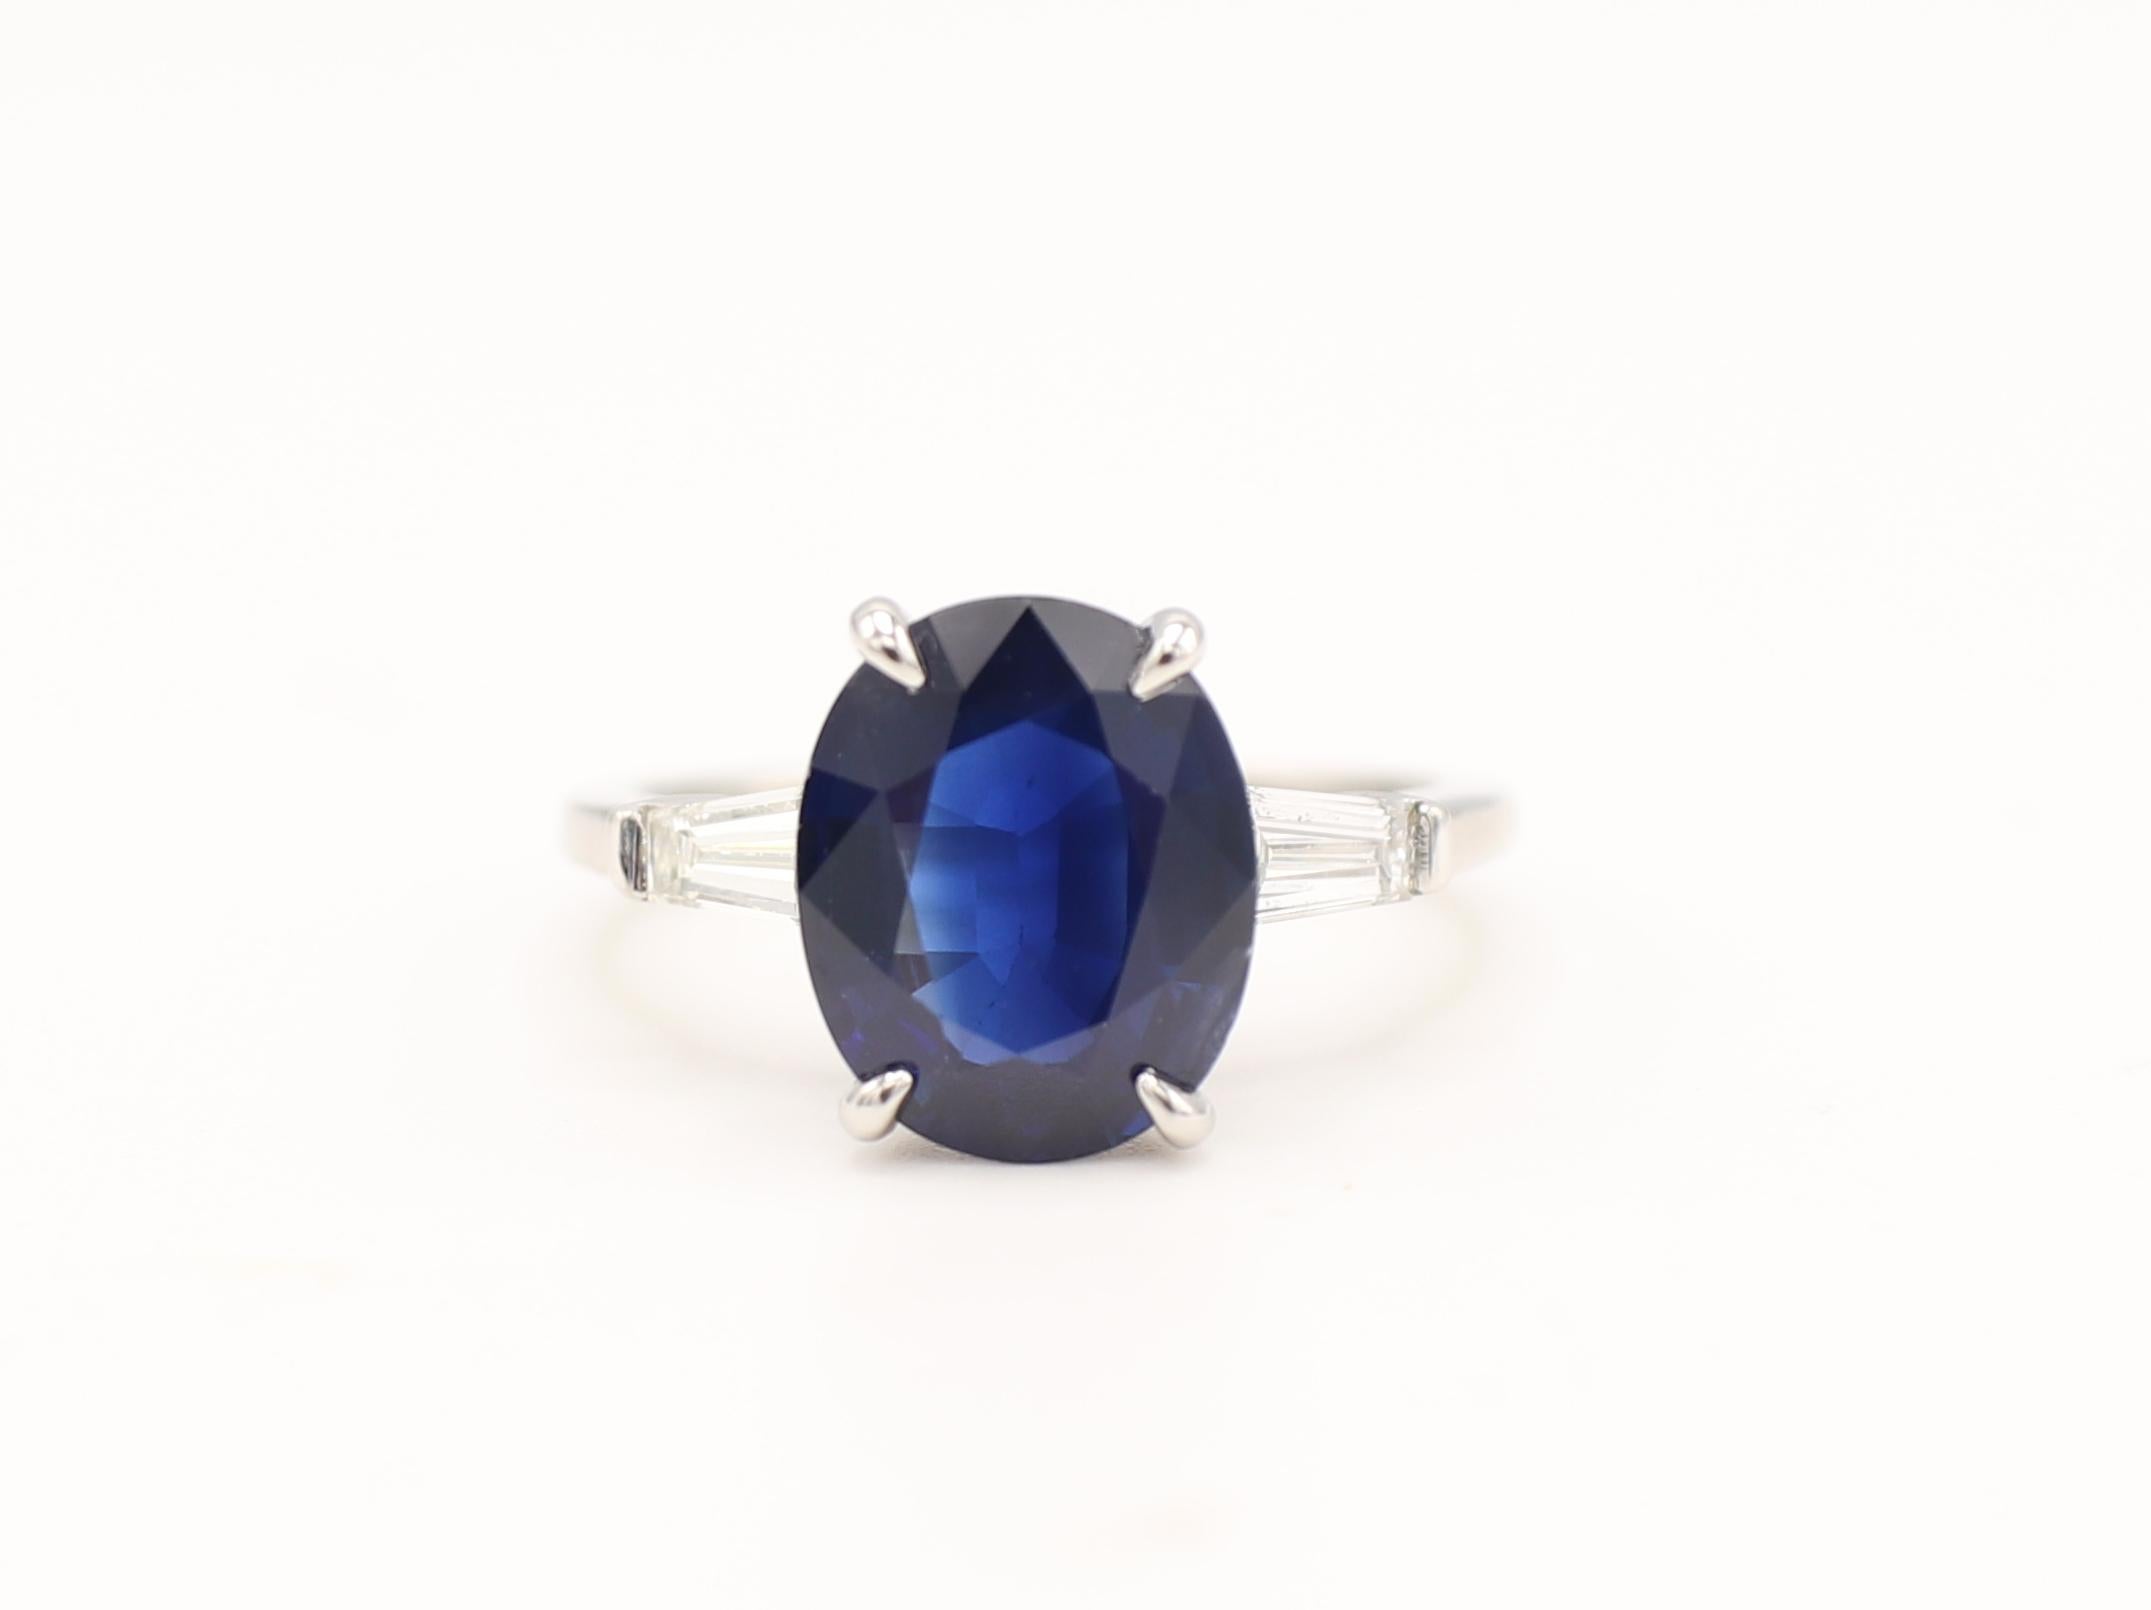 GIA Certified 4.01 Carat Oval Blue Sapphire Platinum Diamond Engagement Ring 
GIA Report Number: 6214903128
Sapphire: Natural 4.01 carat oval, blue (see GIA report pictured for details)
Diamond: Approx. .40 CTW G VS
Metal: Platinum
Weight: 4.88